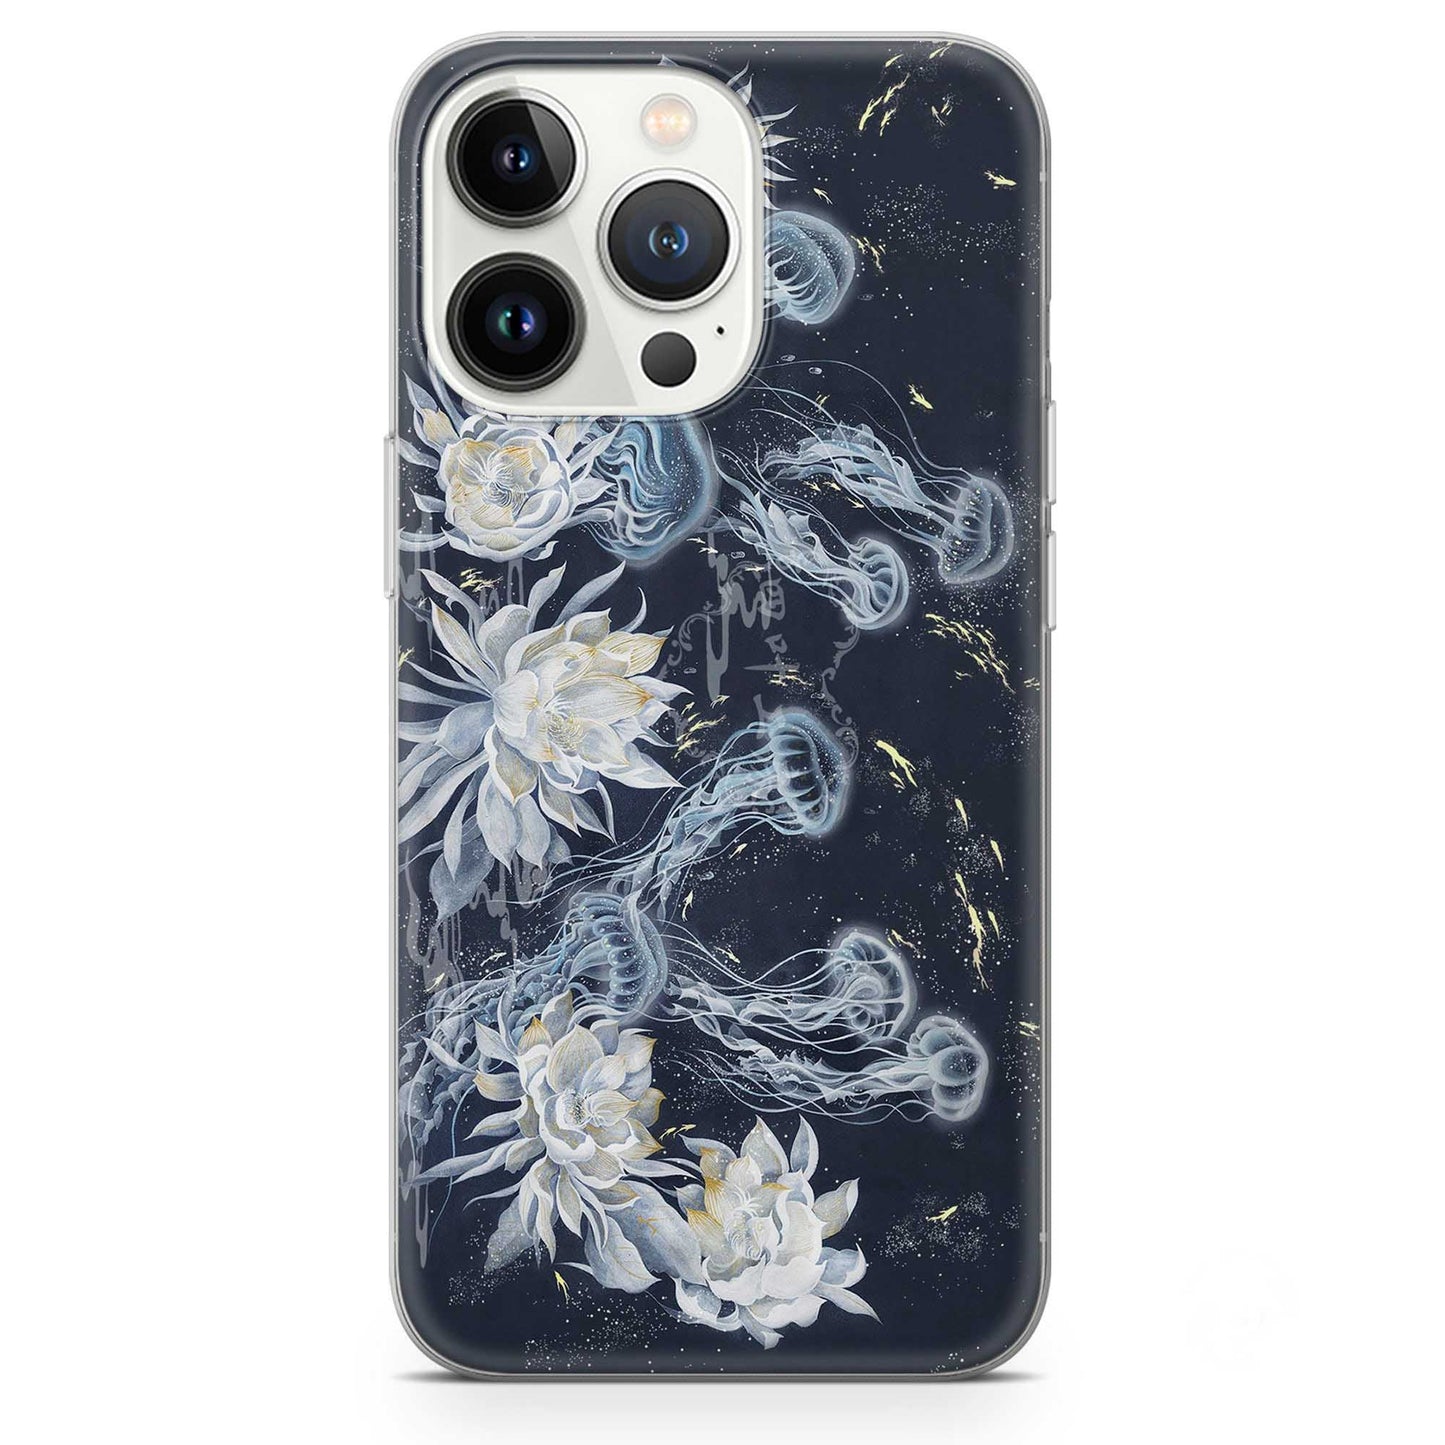 Jellyfish and Flower Phone Case